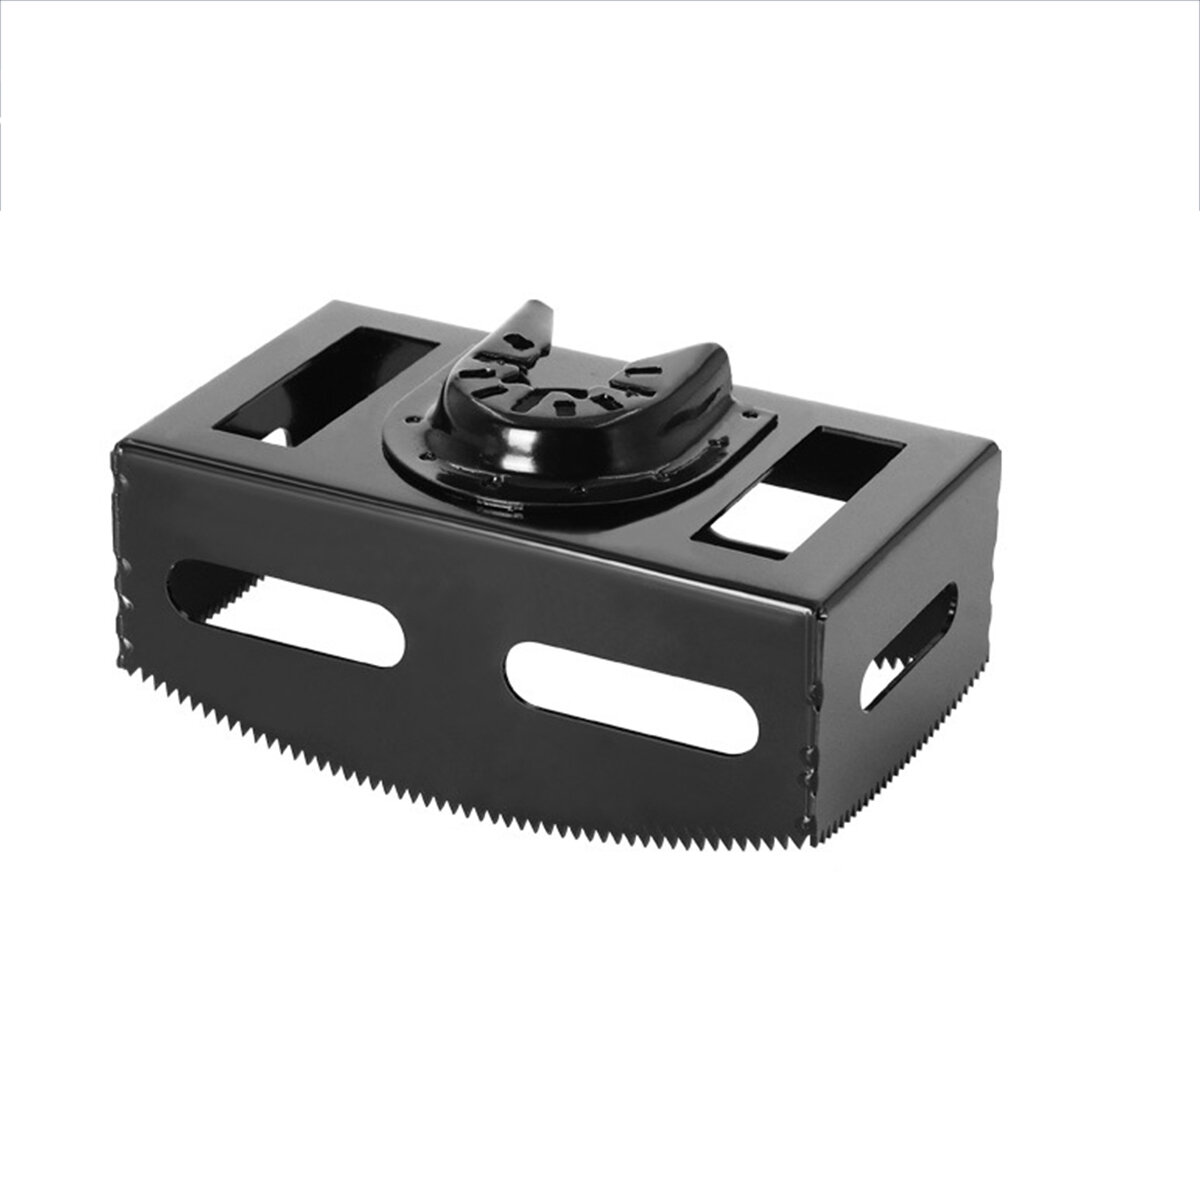 Universal Square Hole Saw High-Carbon Steel Square Hole Saw 33.5mm Cutting Depth Premium Woodworking Tool